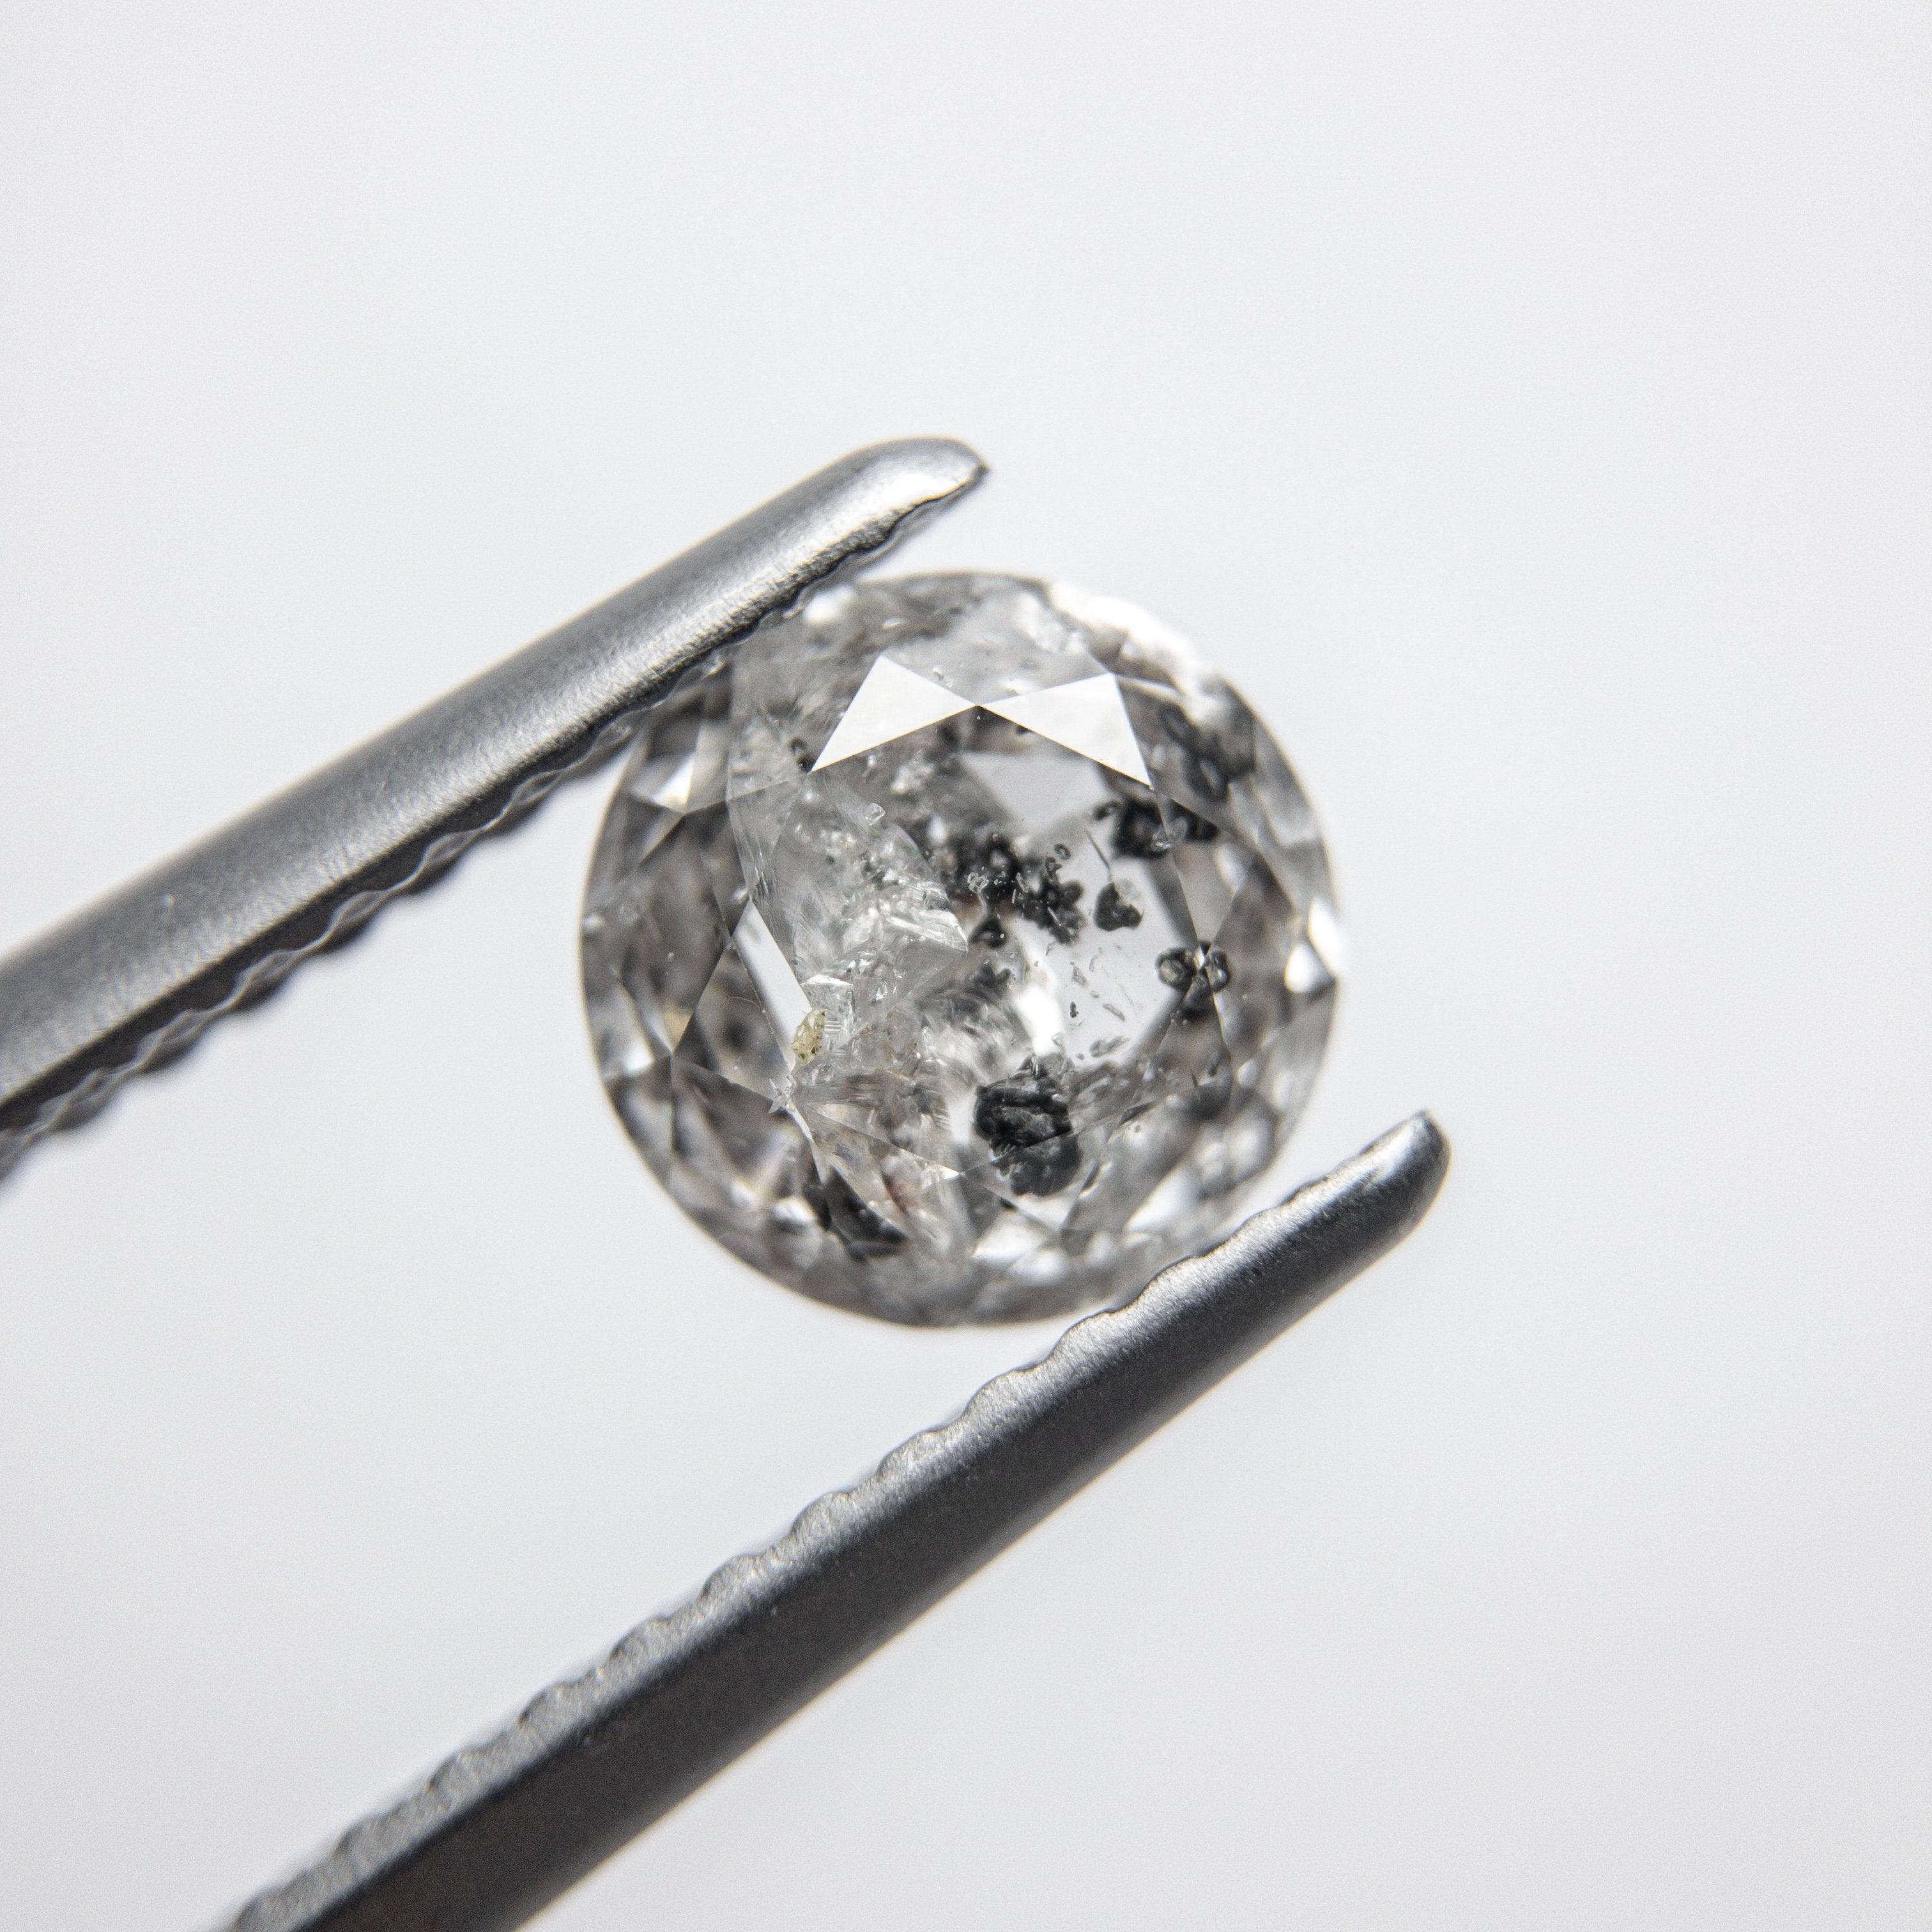 1.02ct 6.44x6.41x3.11mm Round Double Cut 18094-11 HOLD D1339